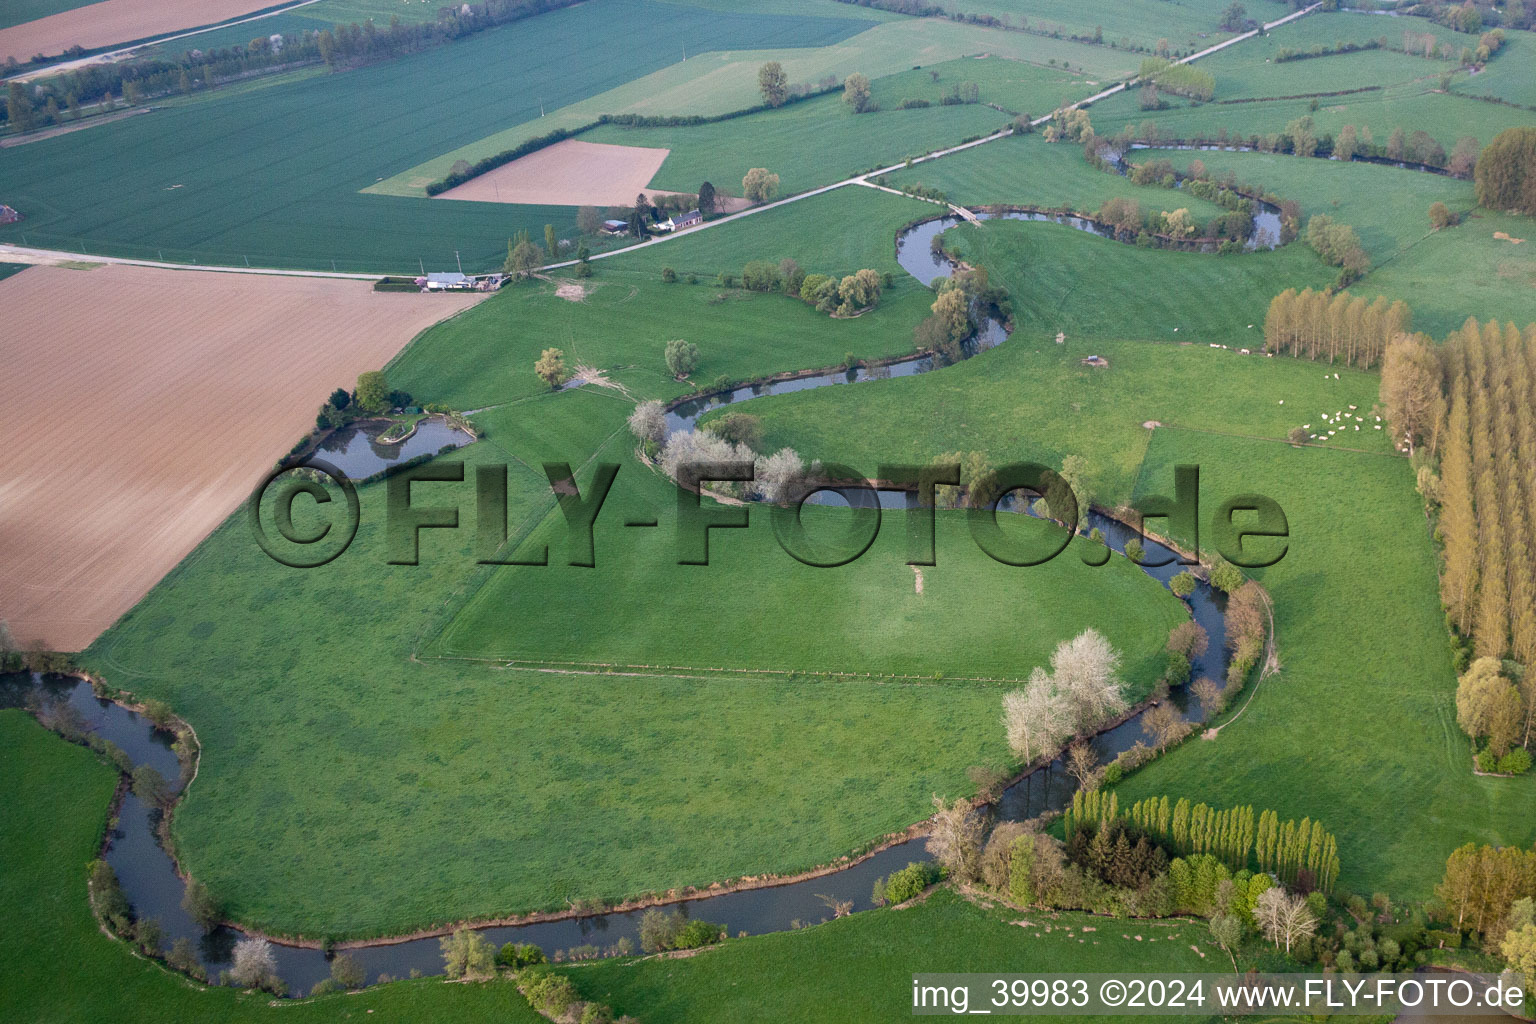 Aerial view of Curved loop of the riparian zones on the course of the river Oise in Chigny in Hauts-de-France, France